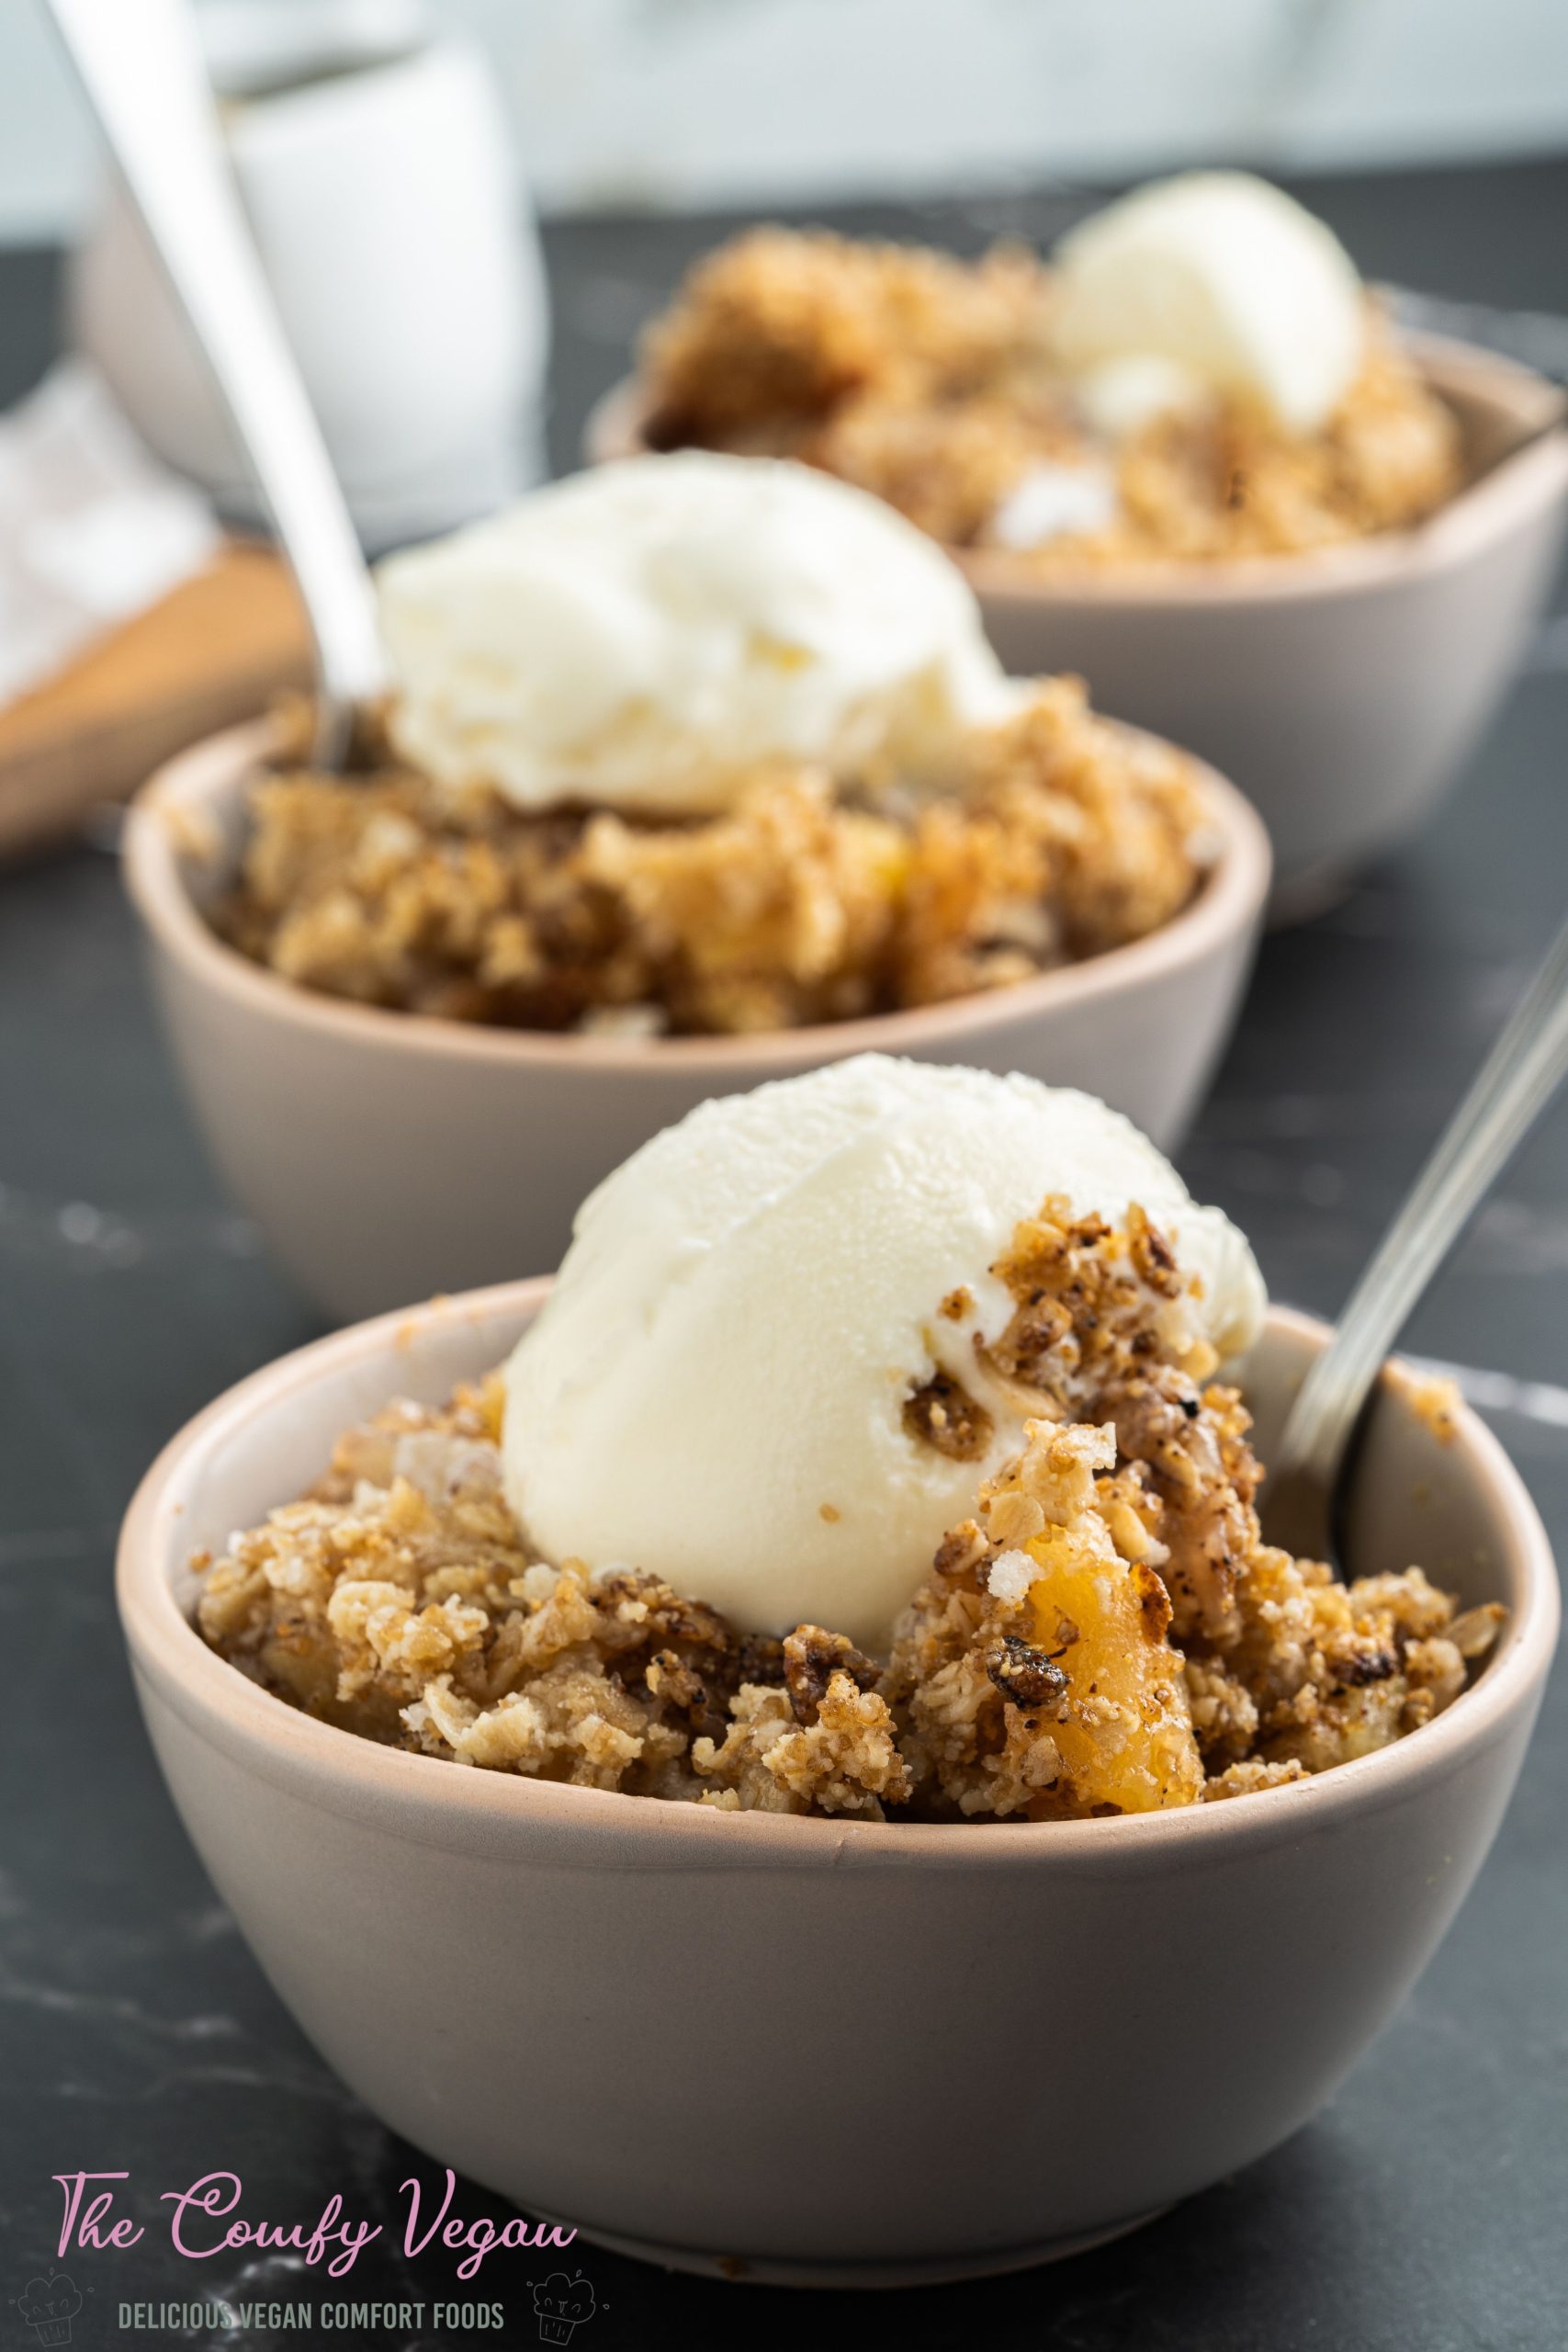 Vegan Gluten-Free Apple Crisp is a go-to fall dessert that you can make with just a few ingredients! Top with your favorite vegan vanilla ice cream to take this comforting dessert to the next level. Easy to make this apple crisp recipe is gluten-free and vegan which makes it suitable for almost every occasion!